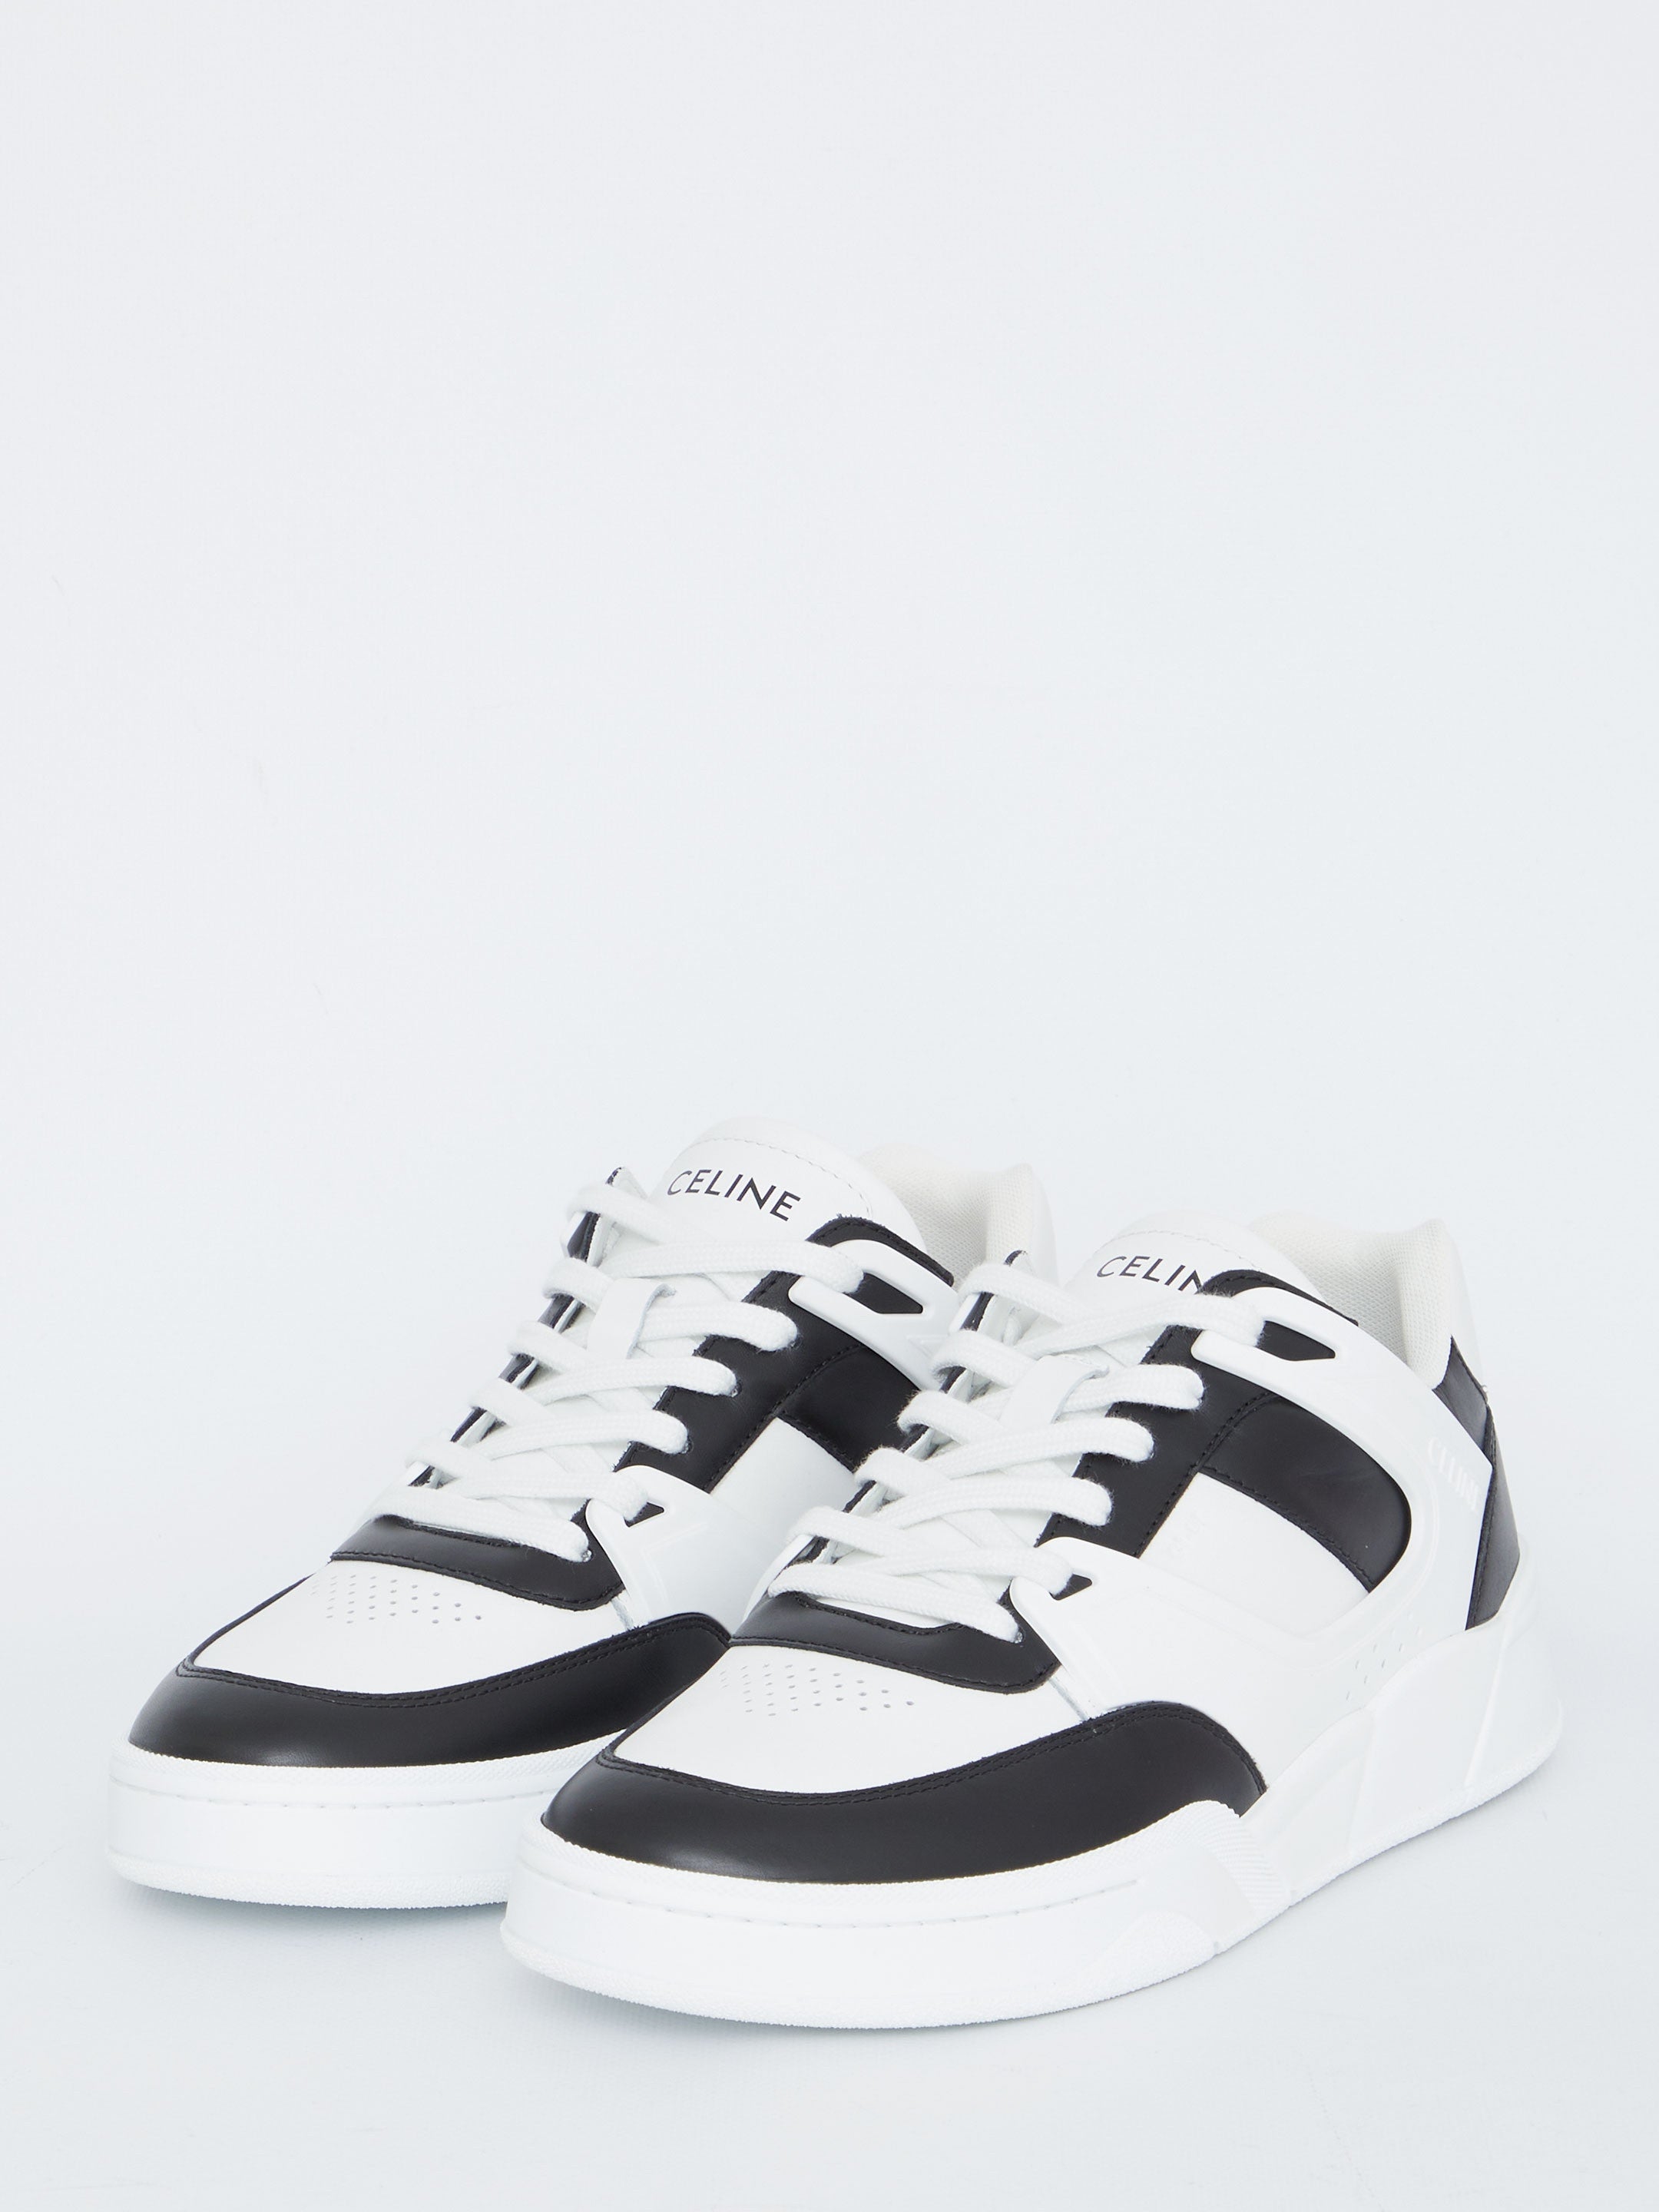 CELINE-OUTLET-SALE-CT-07-sneakers-Sneakers-ARCHIVE-COLLECTION-2.jpg